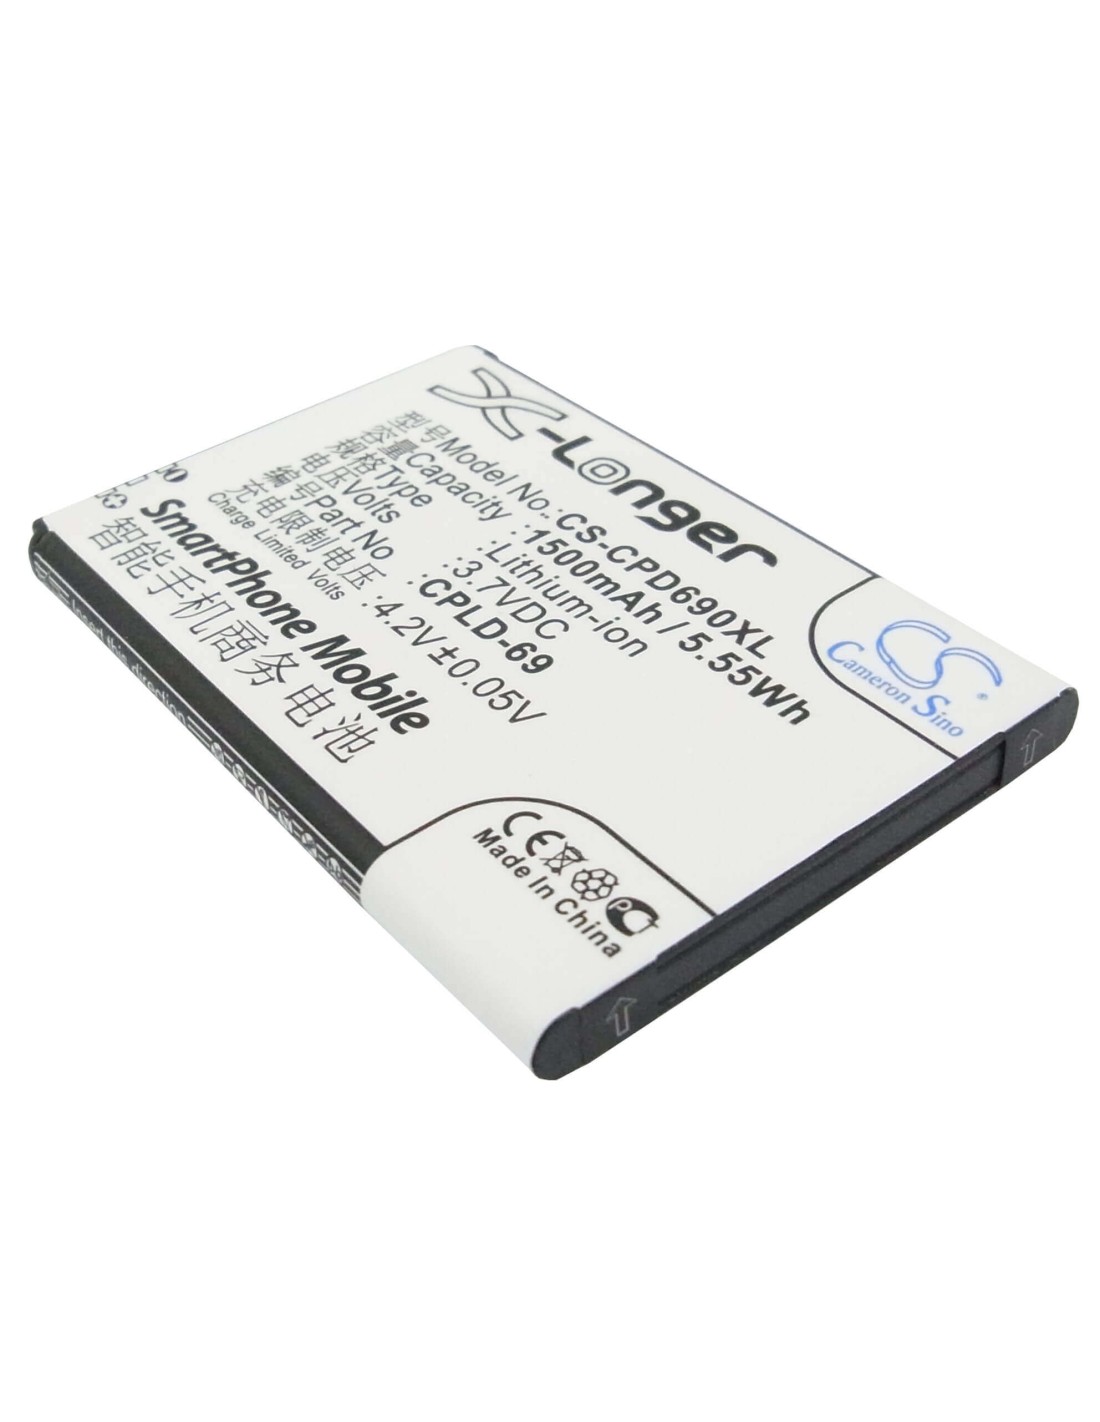 Battery for Coolpad 8809 3.7V, 1500mAh - 5.55Wh